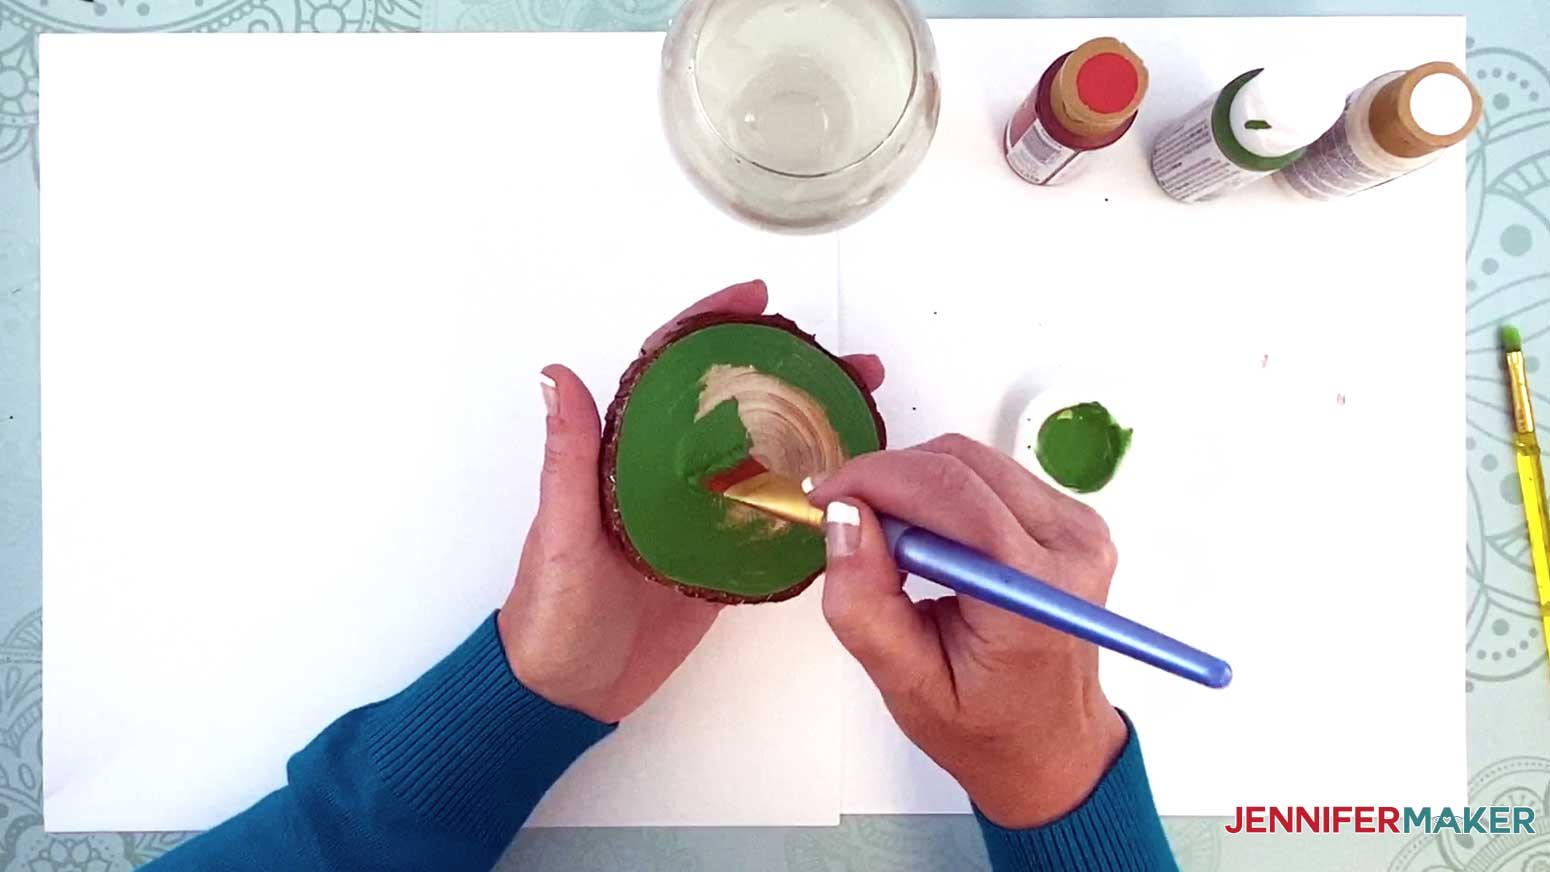 Use a larger brush to paint the middle of the wood slice ornament